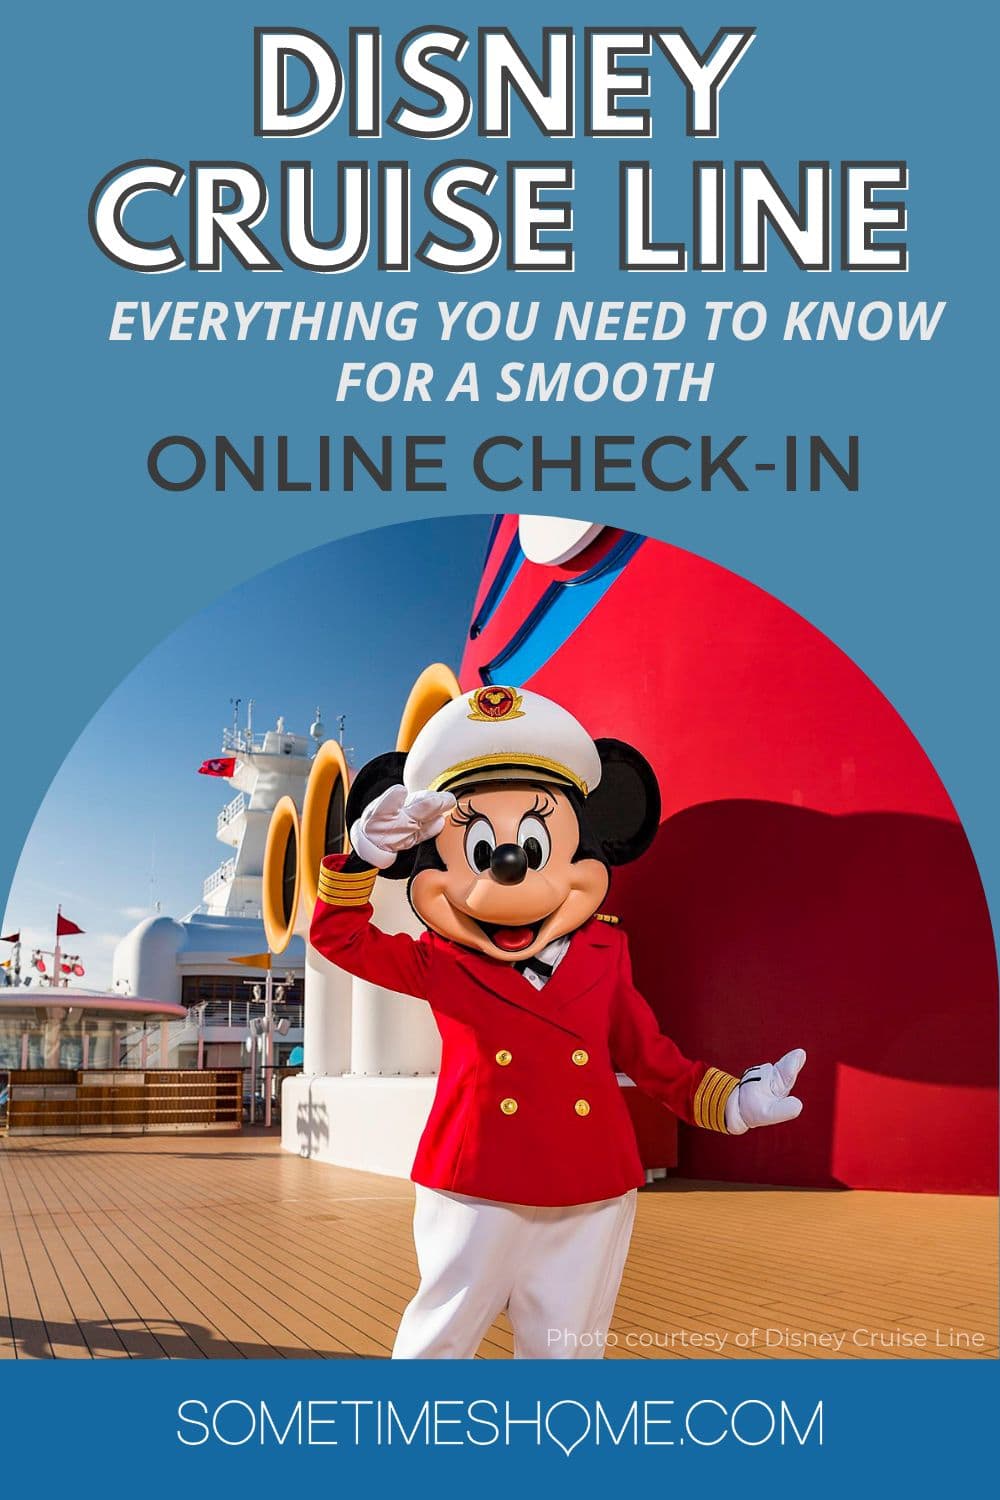 Disney Cruise Line: everything you need to know for a smooth online check-in process, with a picture of a captain Minnie Mouse